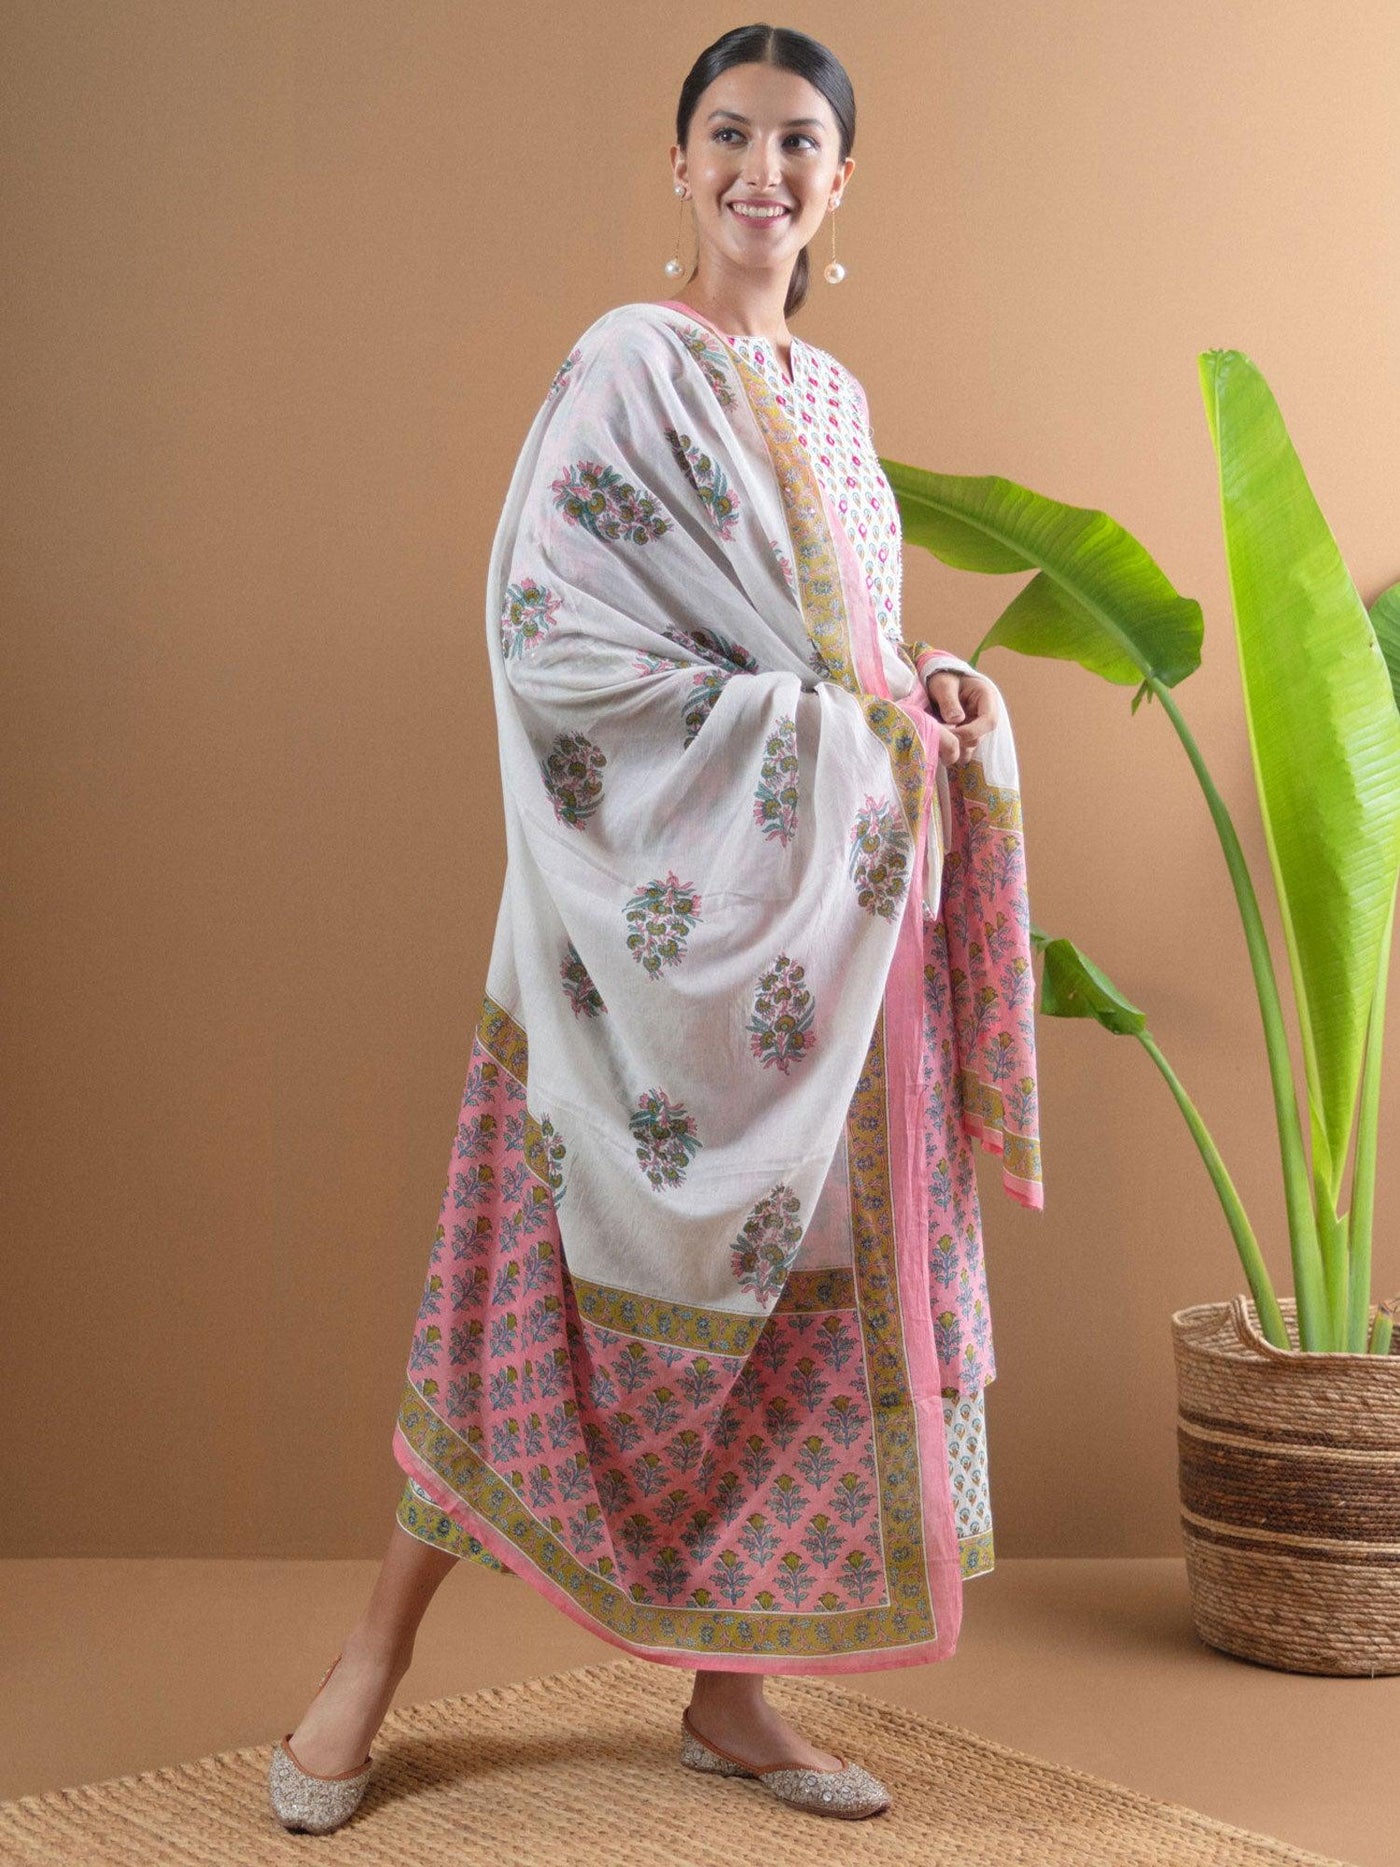 Pink Printed Cotton Suit Set With Mask - Libas